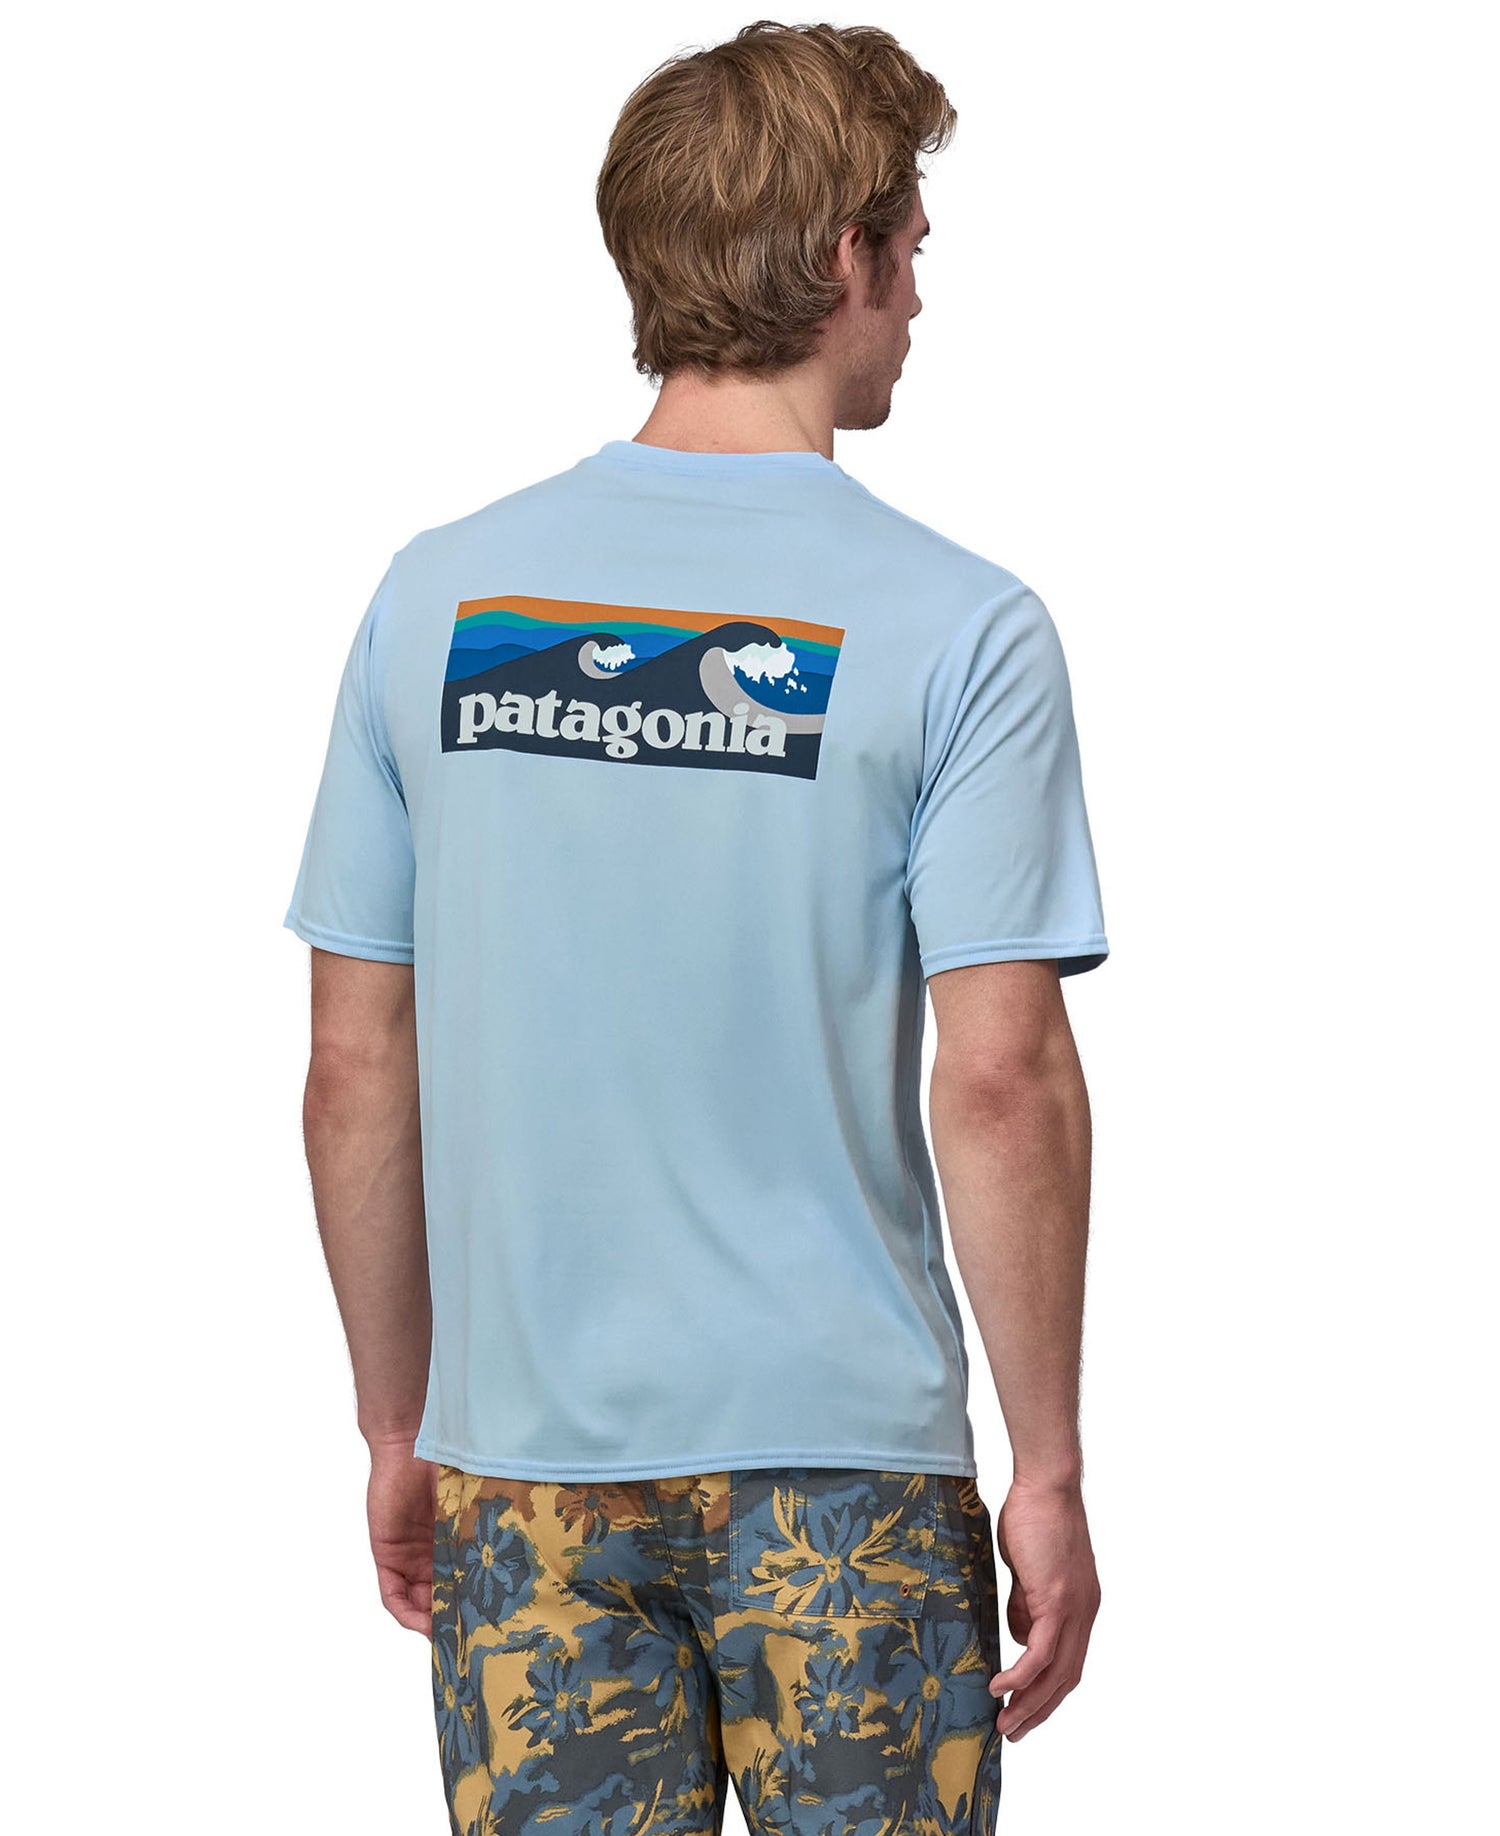 Cap Cool Daily Graphic Shirt - Boardshort Logo: Chilled Blue